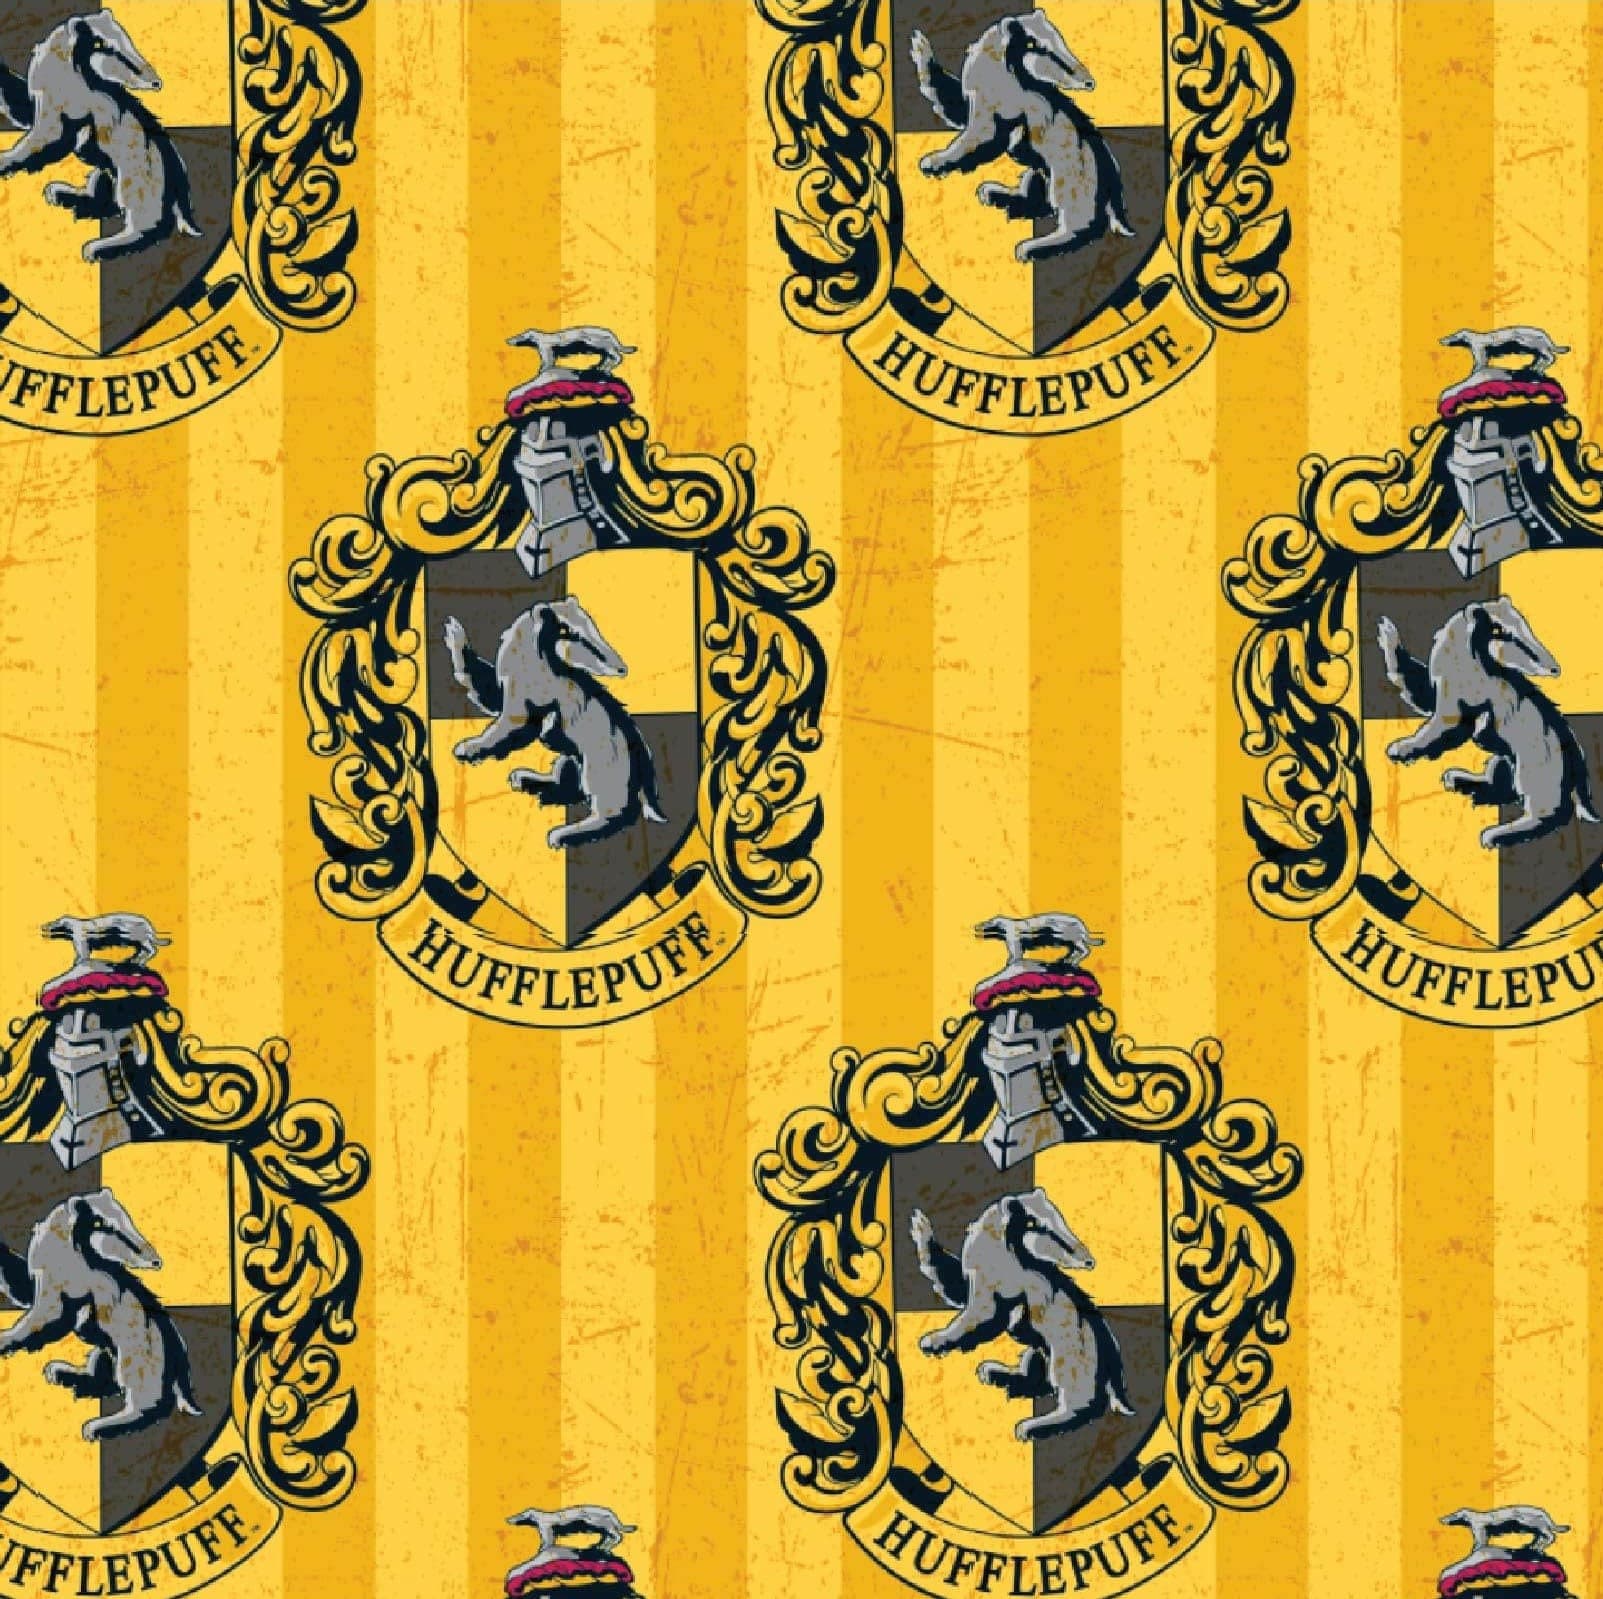 Harry Potter Collection, Hufflepuffs House, double-sided scrapbook paper  (Paper House)